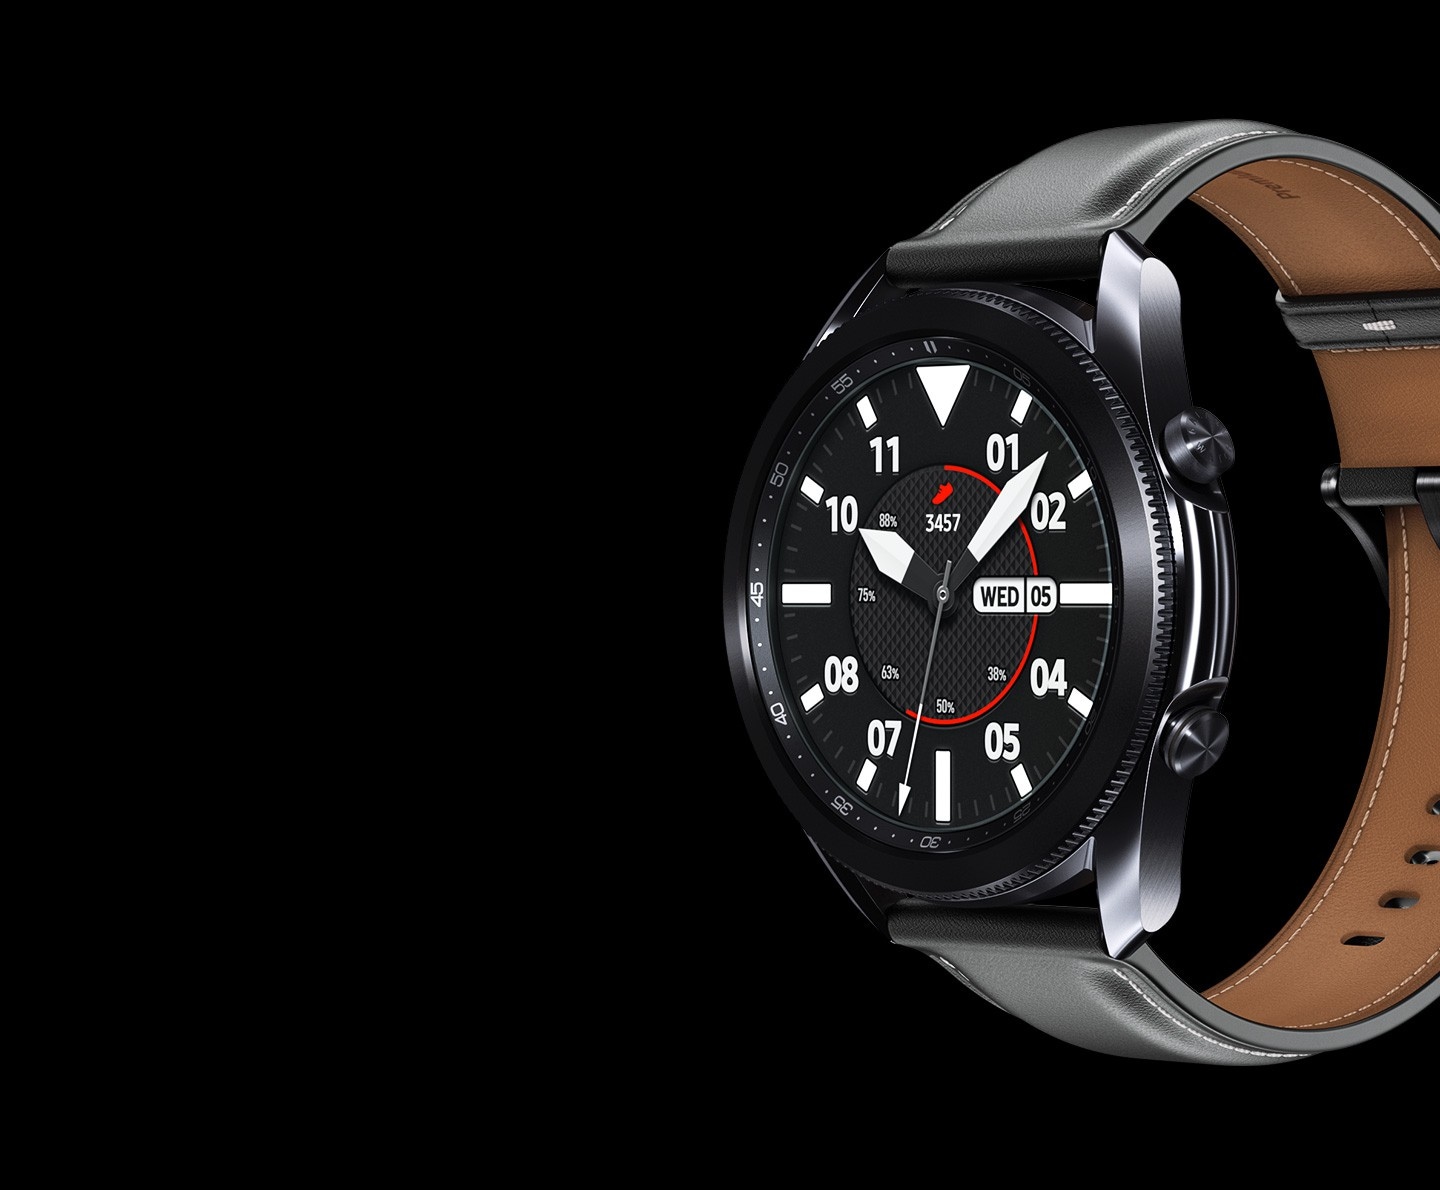 45mm Galaxy Watch3 in Mystic Black with a Sporty Classic Watch Face seen from an angle.